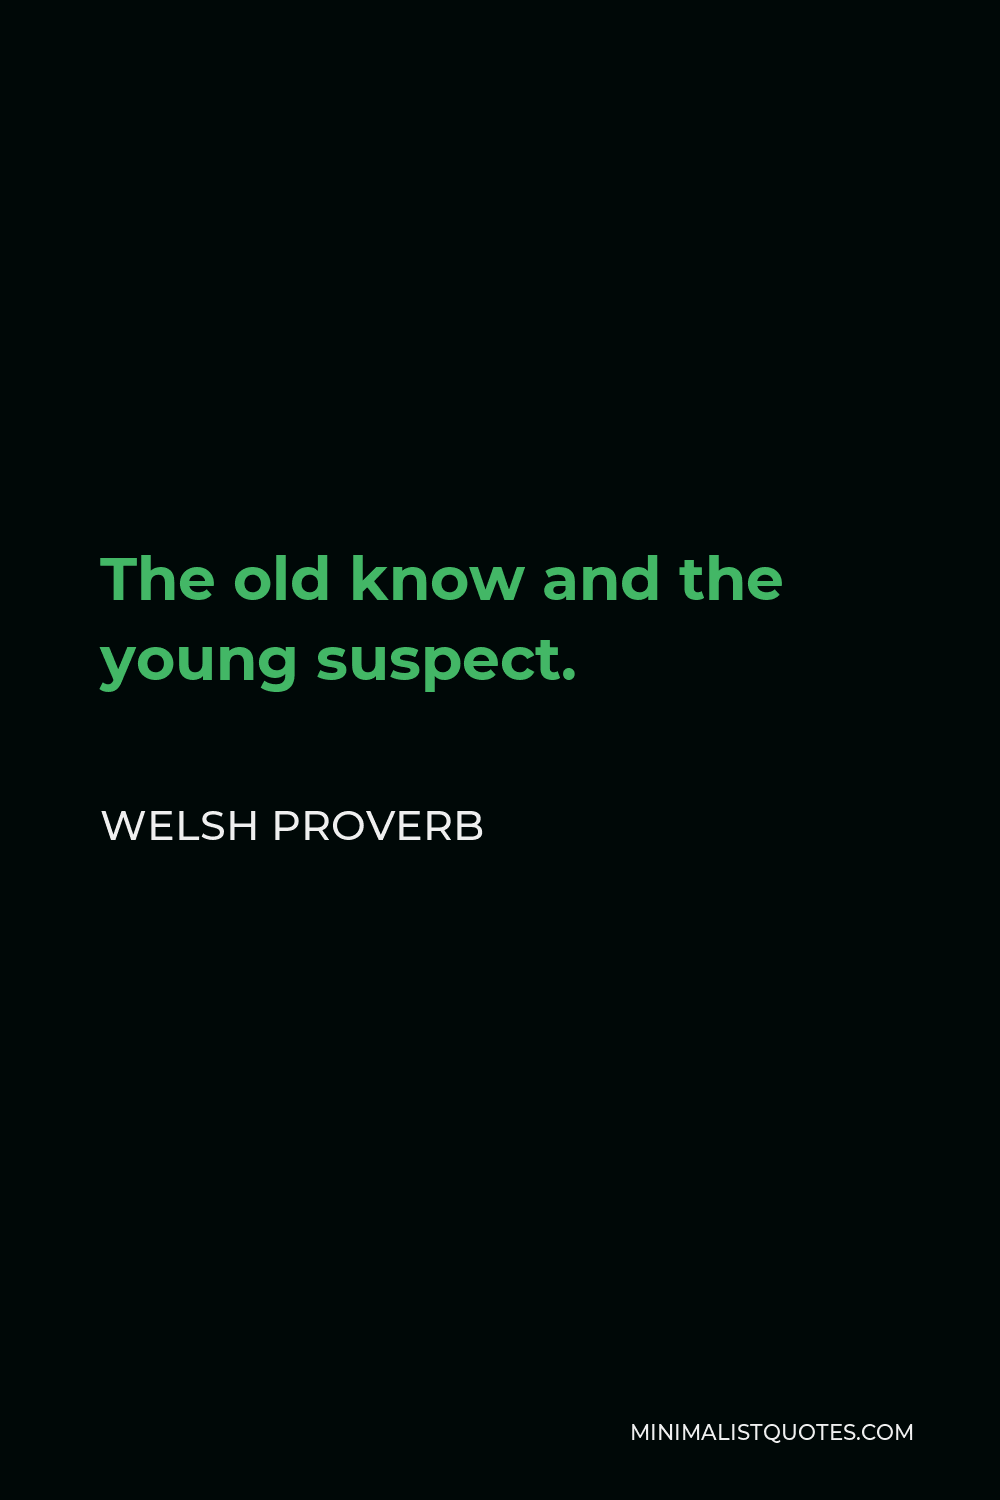 Welsh Proverb Quote - The old know and the young suspect.